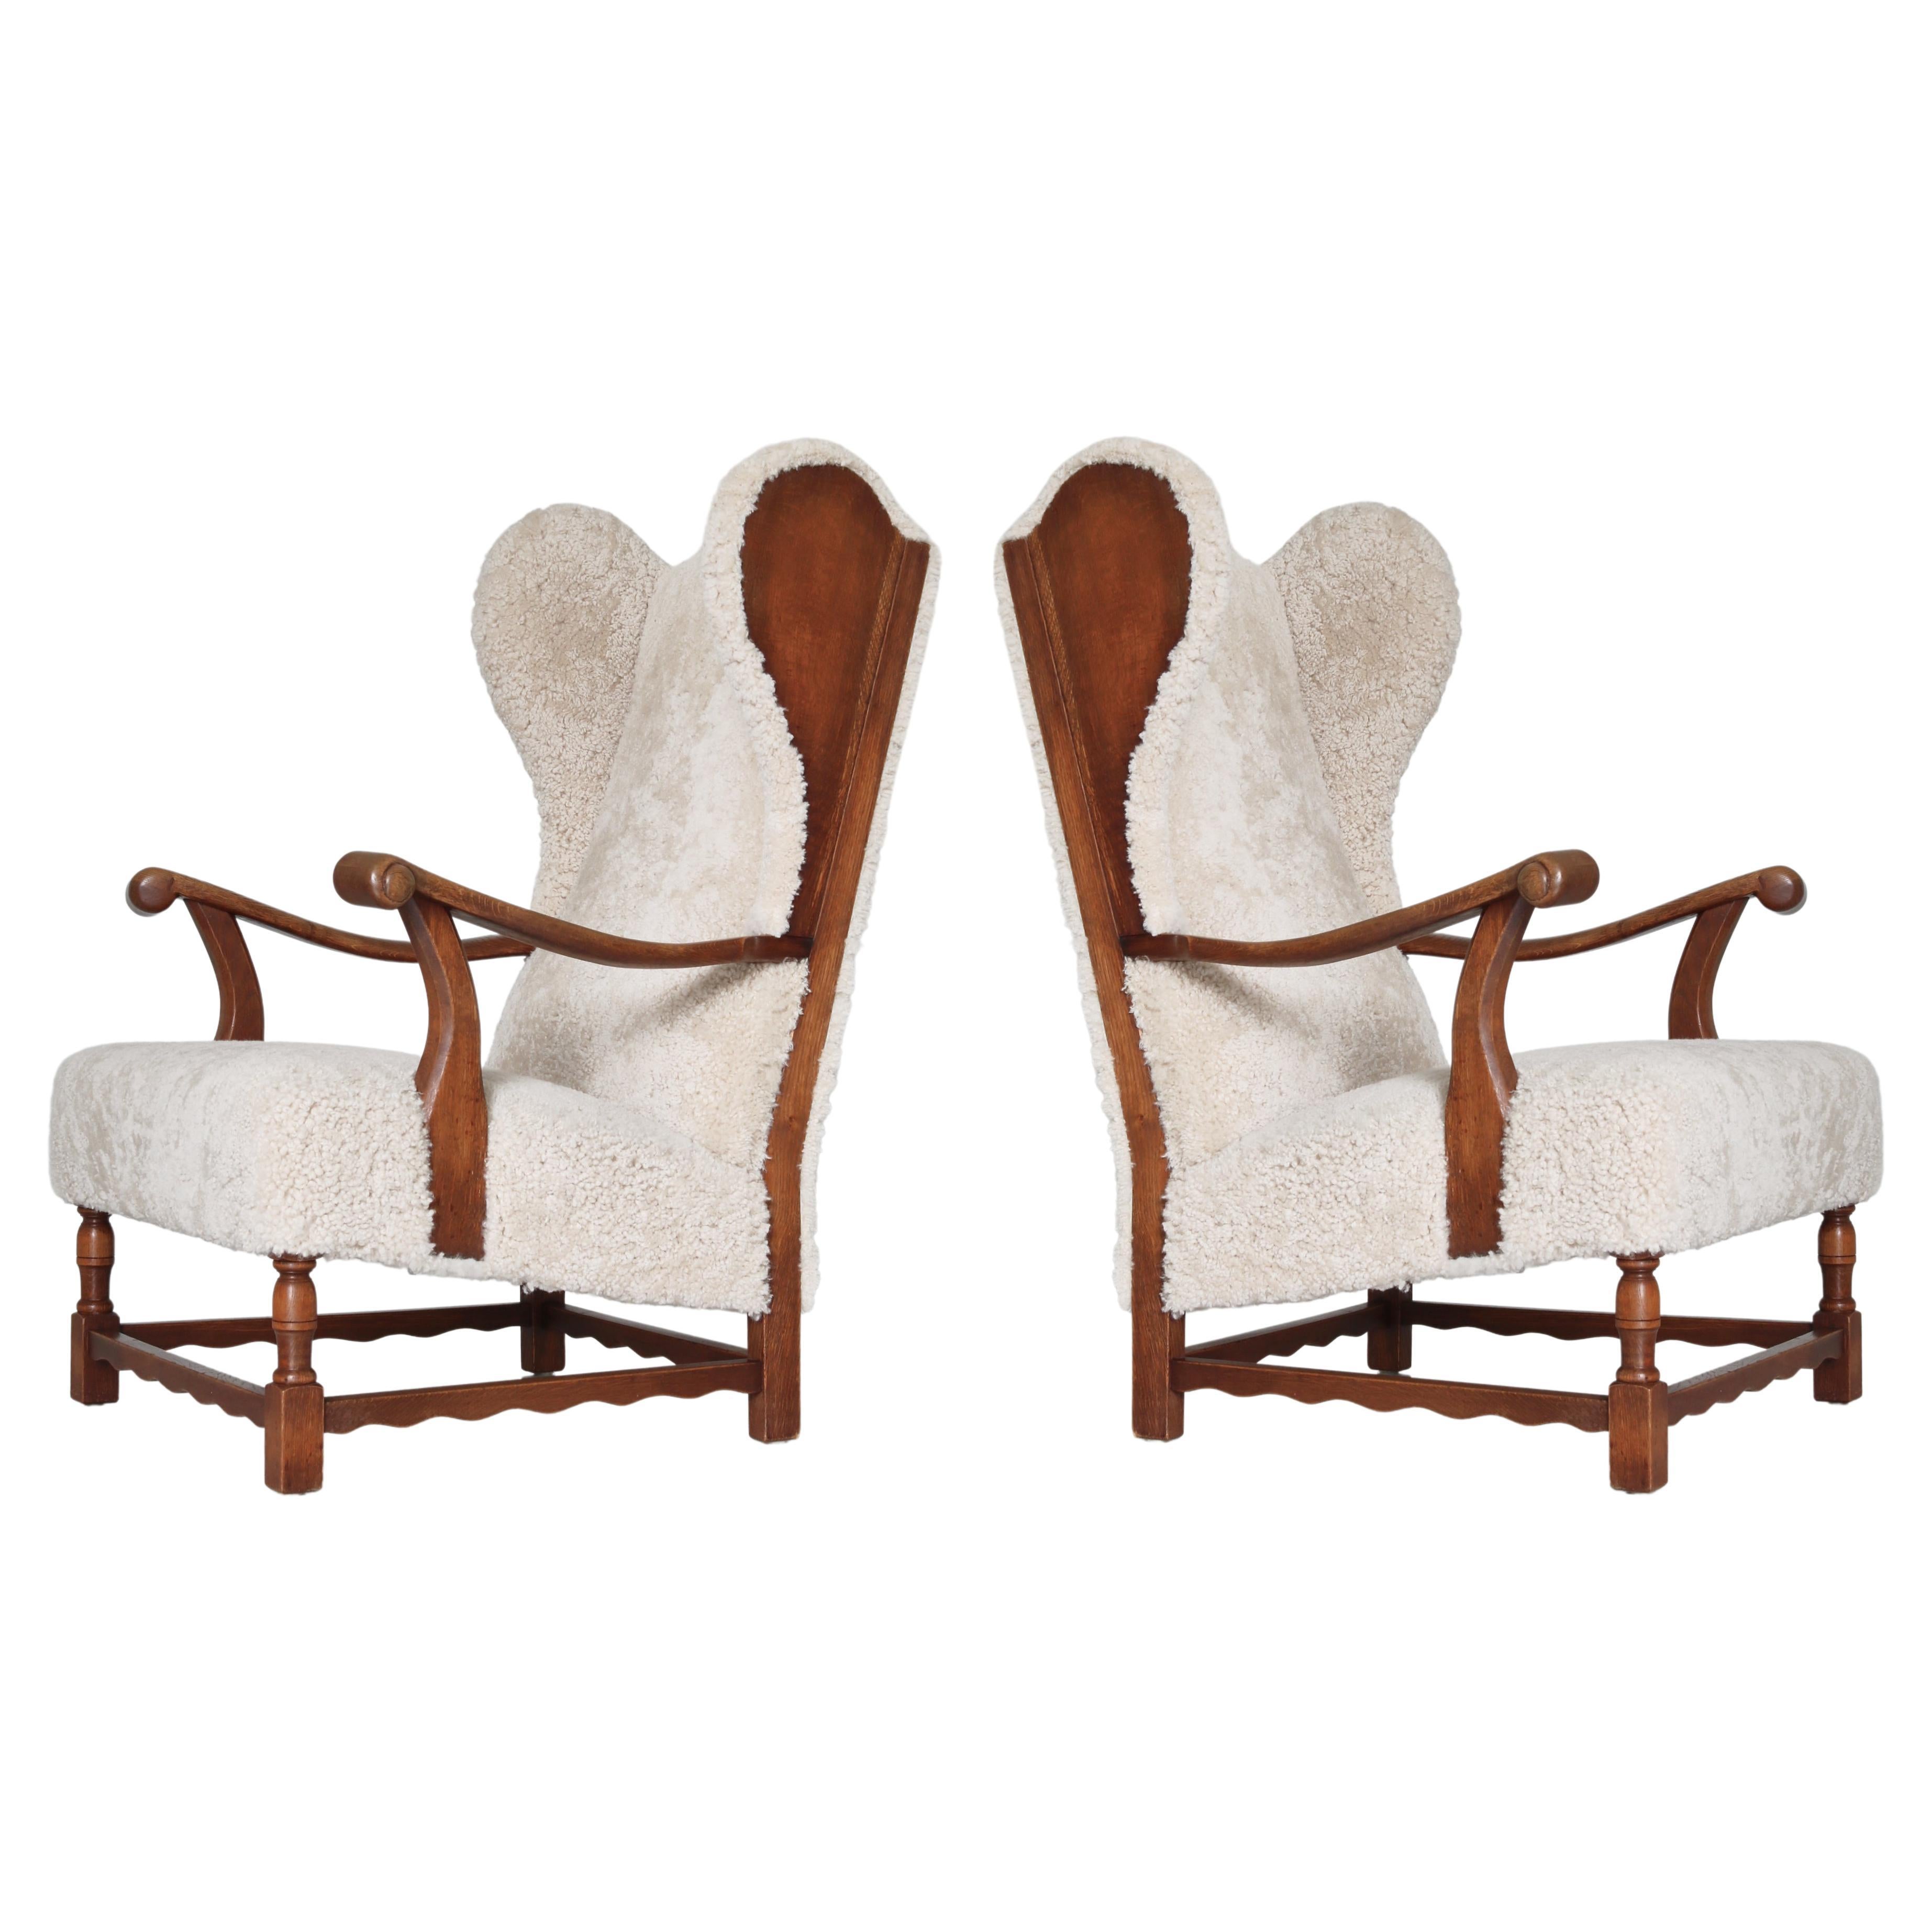 Wingback Lounge Chairs in Solid Oak and Sheepskin by Danish Cabinetmaker, 1940s